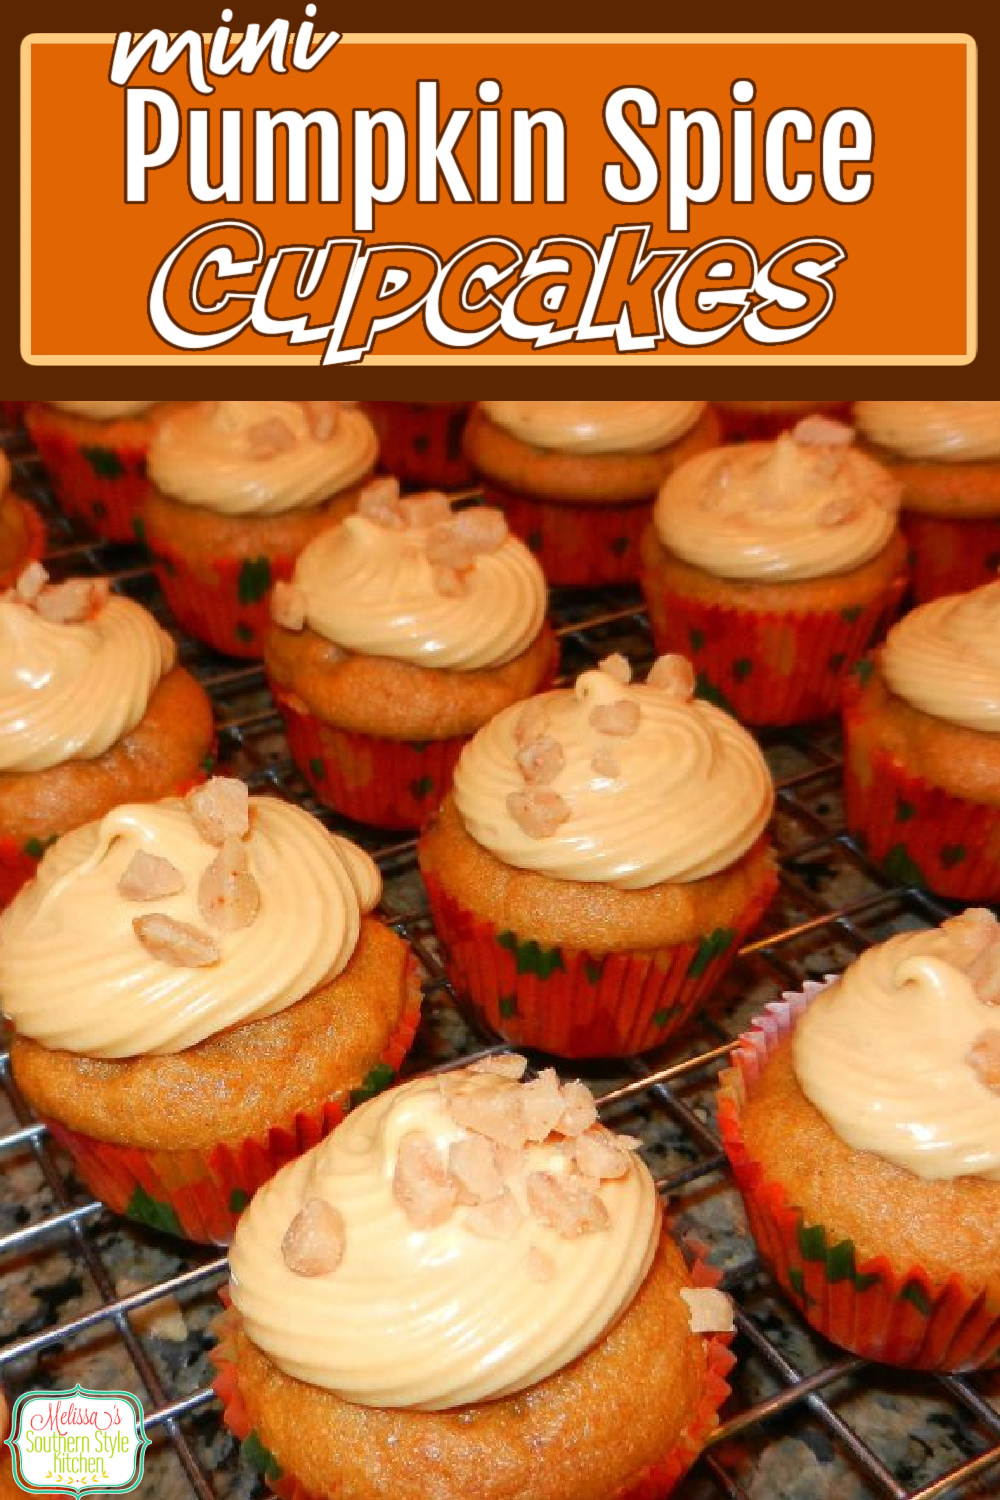 These two-bite cupcakes are the perfect handheld treat for your holiday and fall dessert table. #pumpkincupcakes $pumpkinspice #pumpkinspicecupcakes #creamcheeseicing #minicupcakes #caramelicing #fallbaking #holidaydesserts #thanksgivingrecipes via @melissasssk